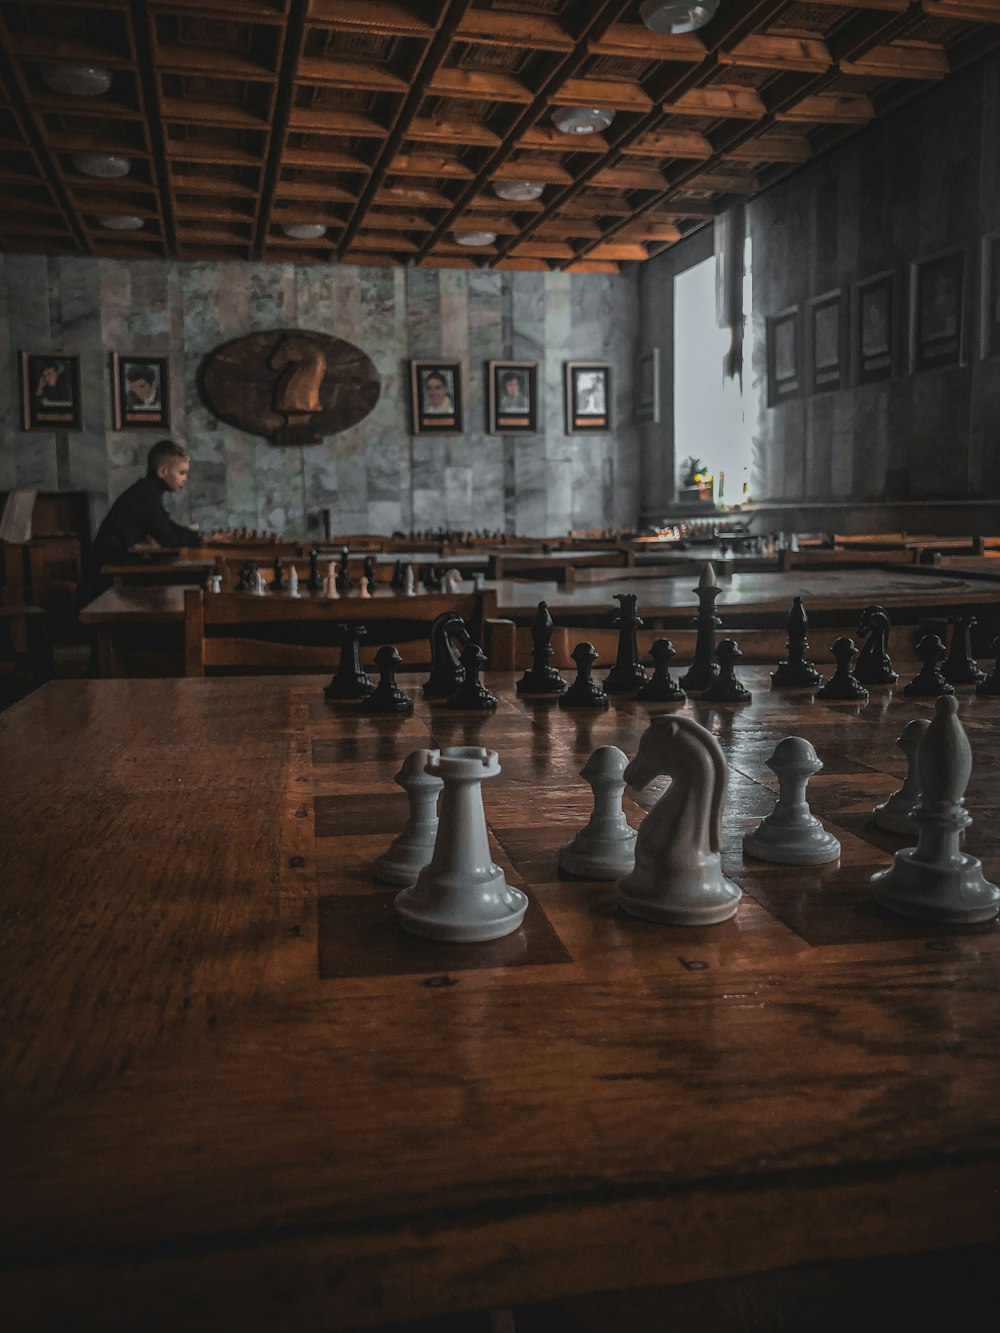 brown wooden table with chess pieces